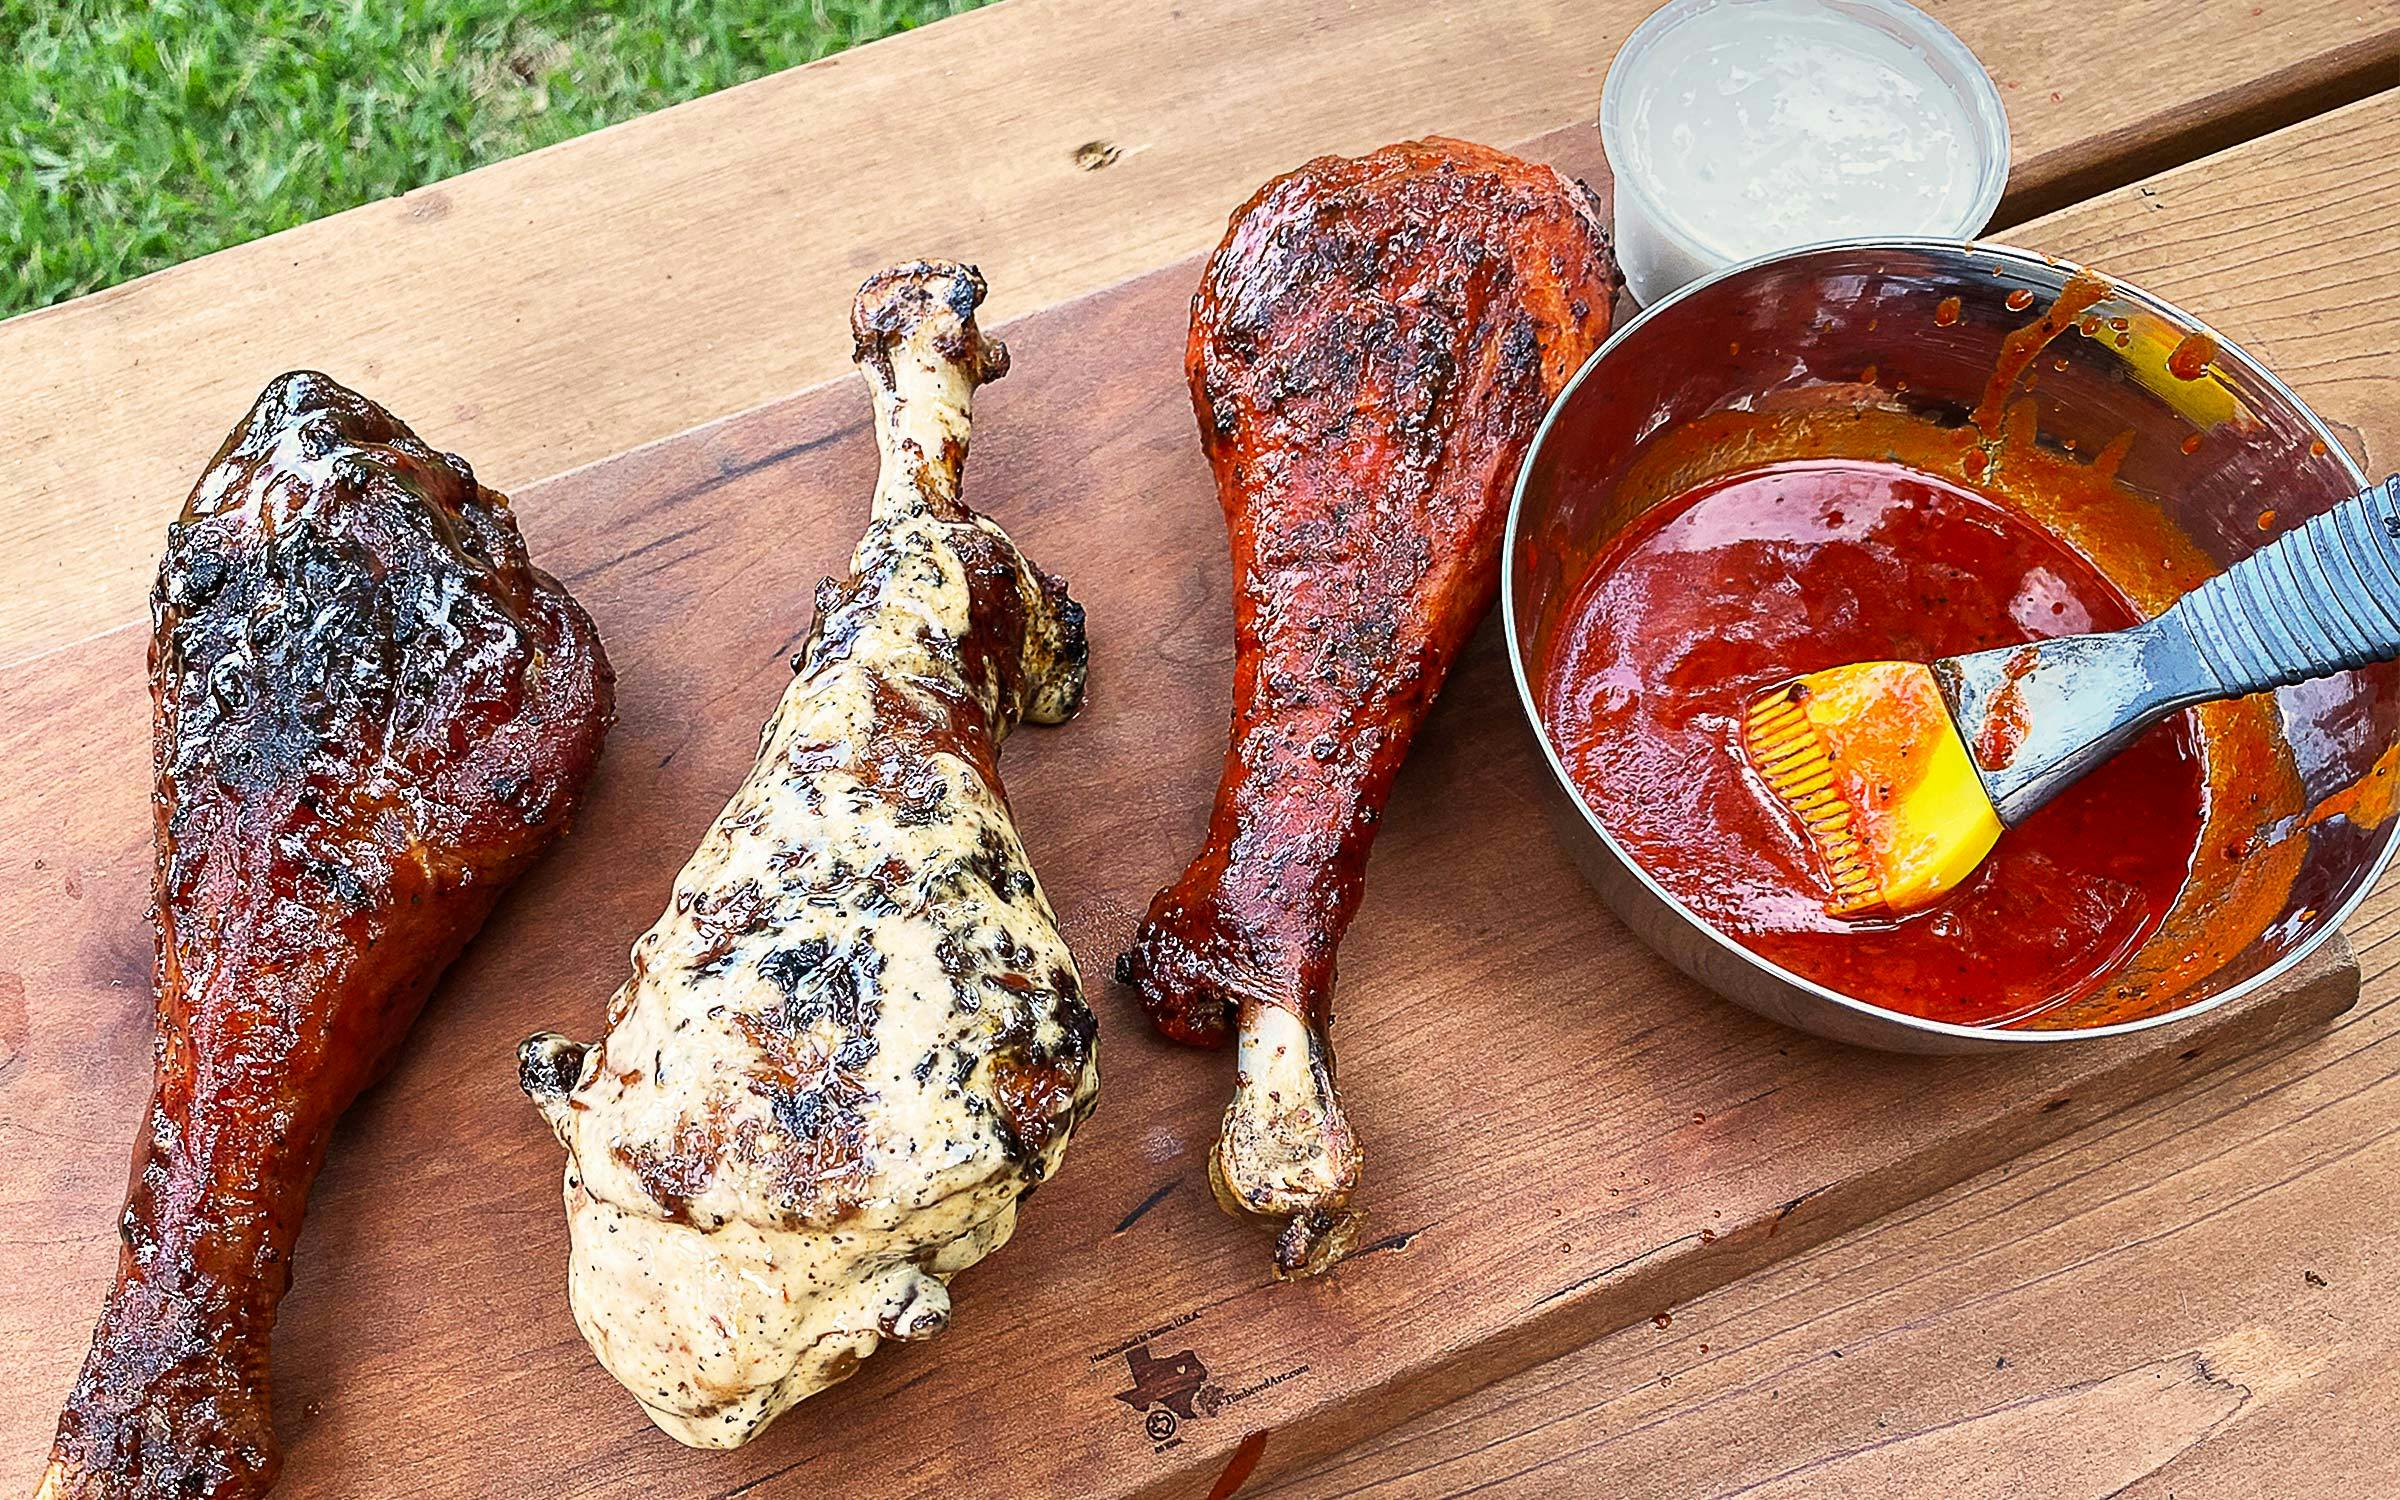 Meat Church BBQ - Smoked Turkey Legs anyone? New video is